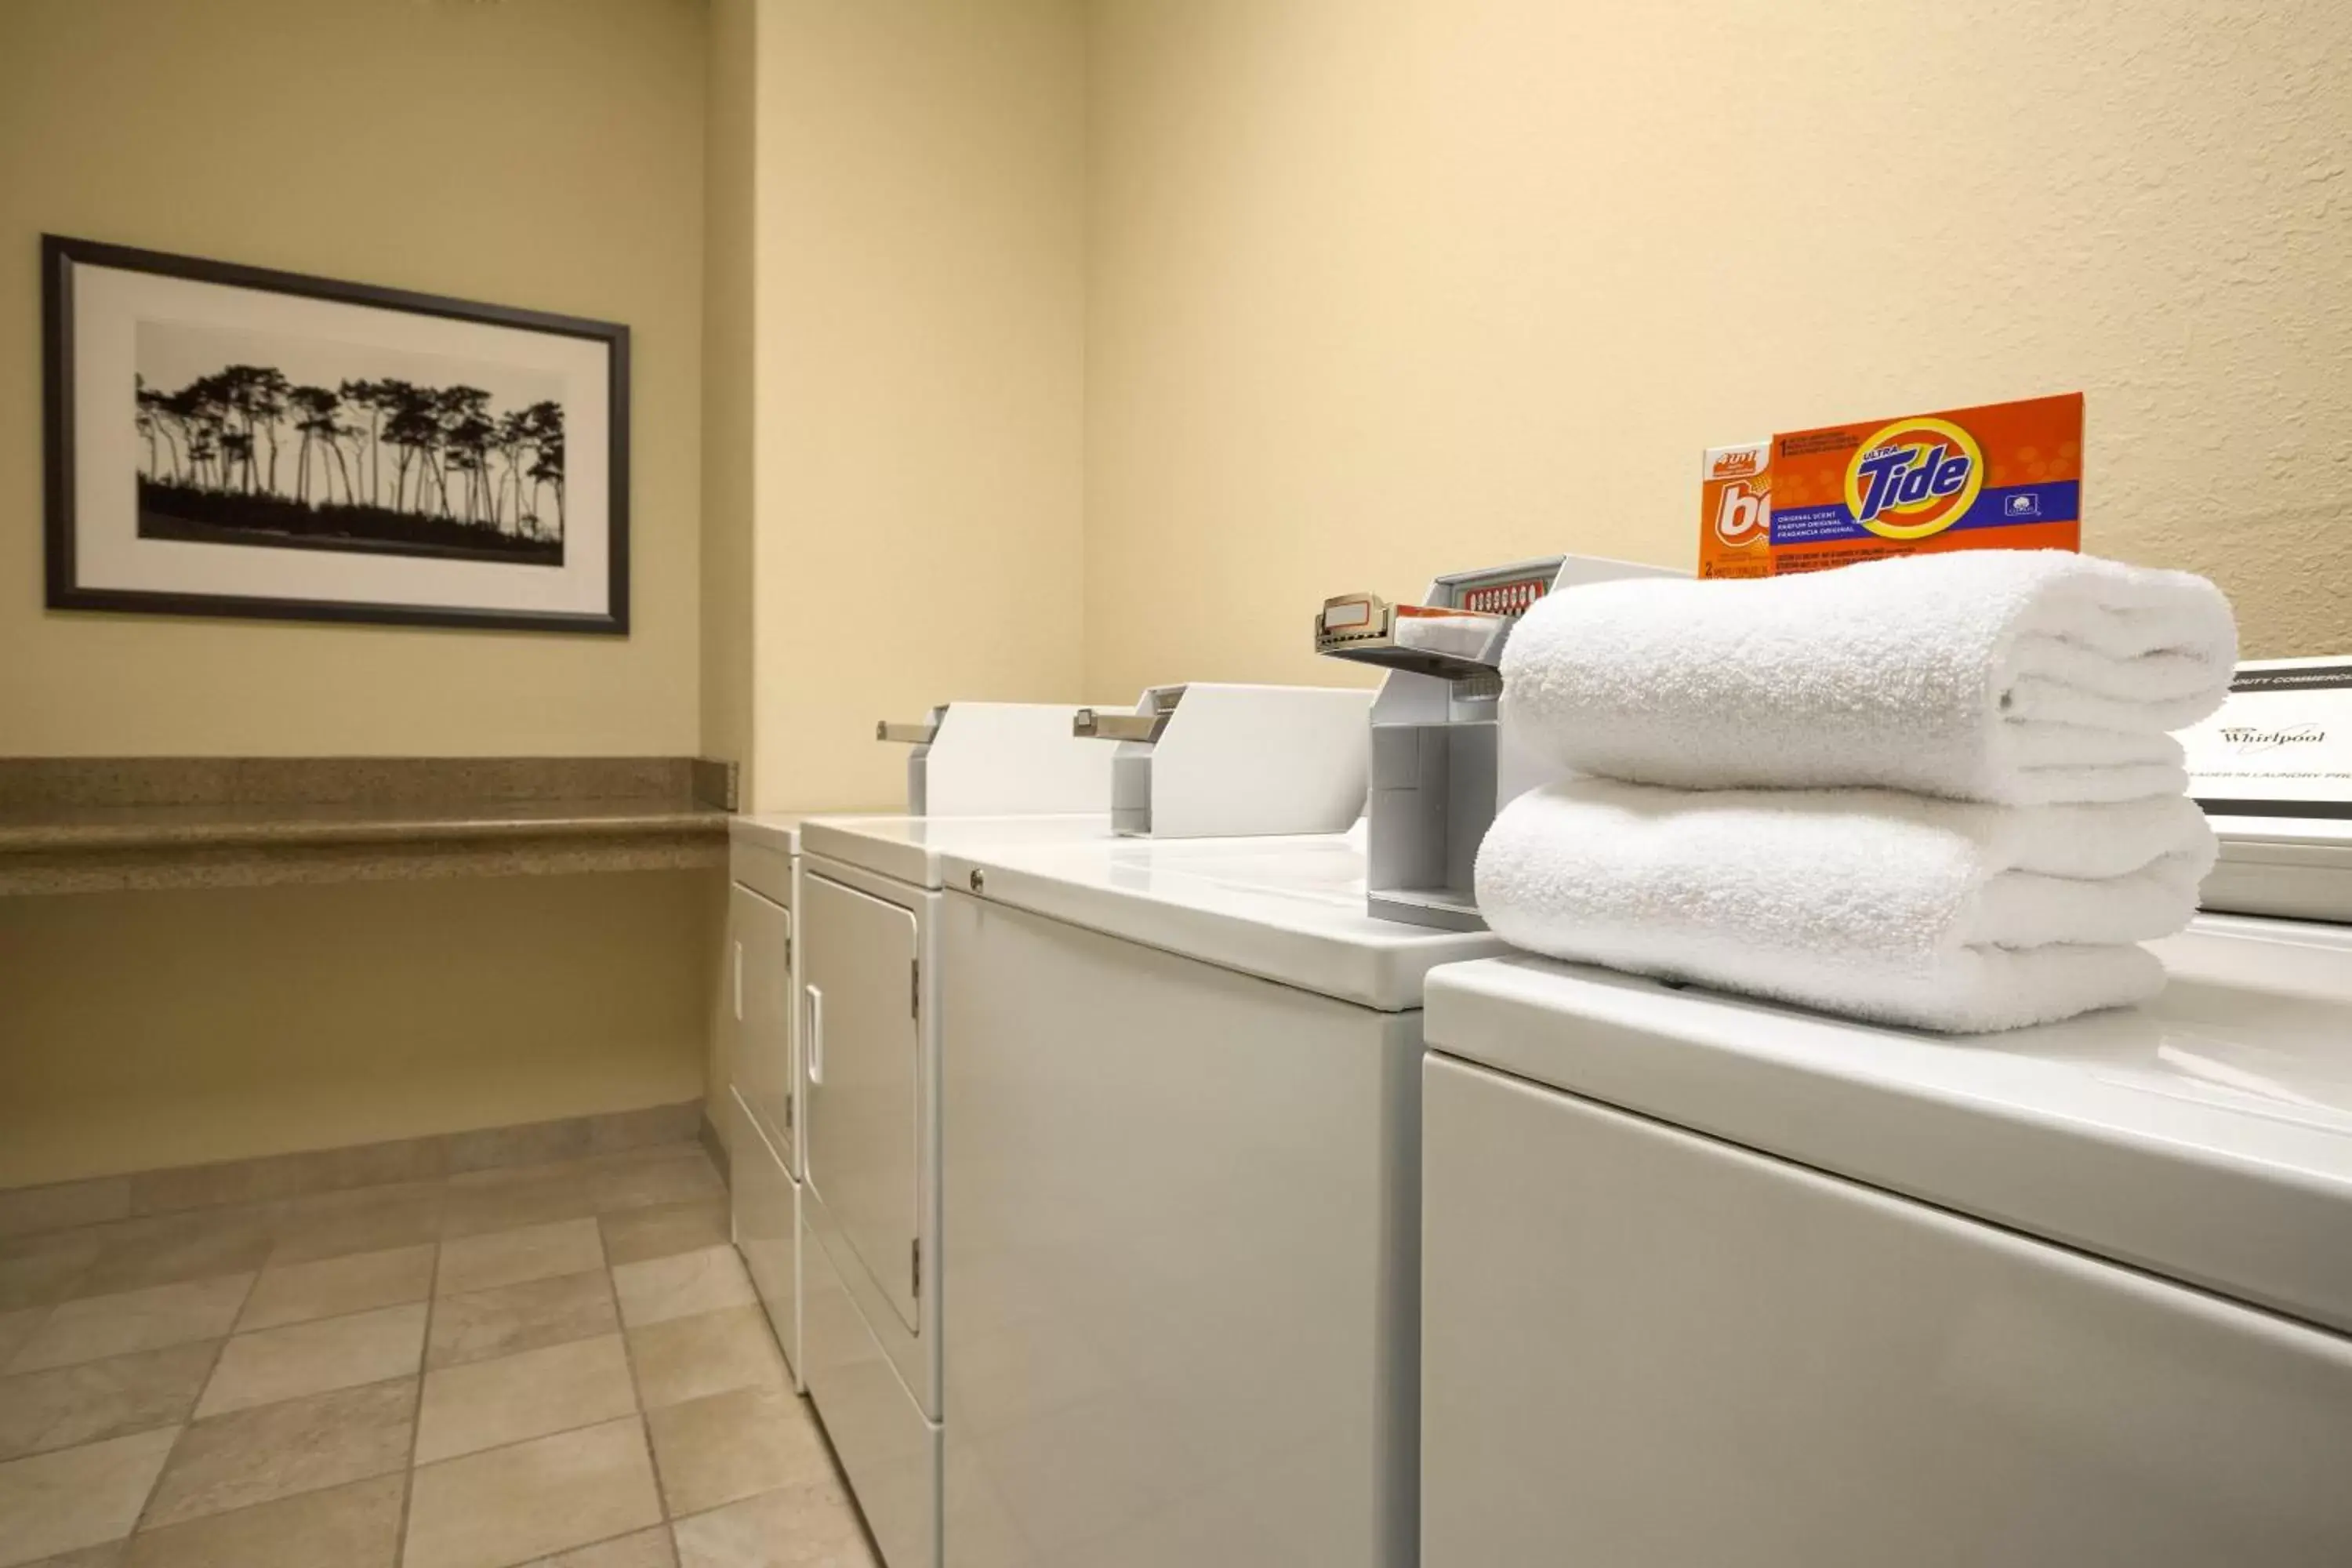 Area and facilities in Country Inn & Suites by Radisson, St. Cloud West, MN